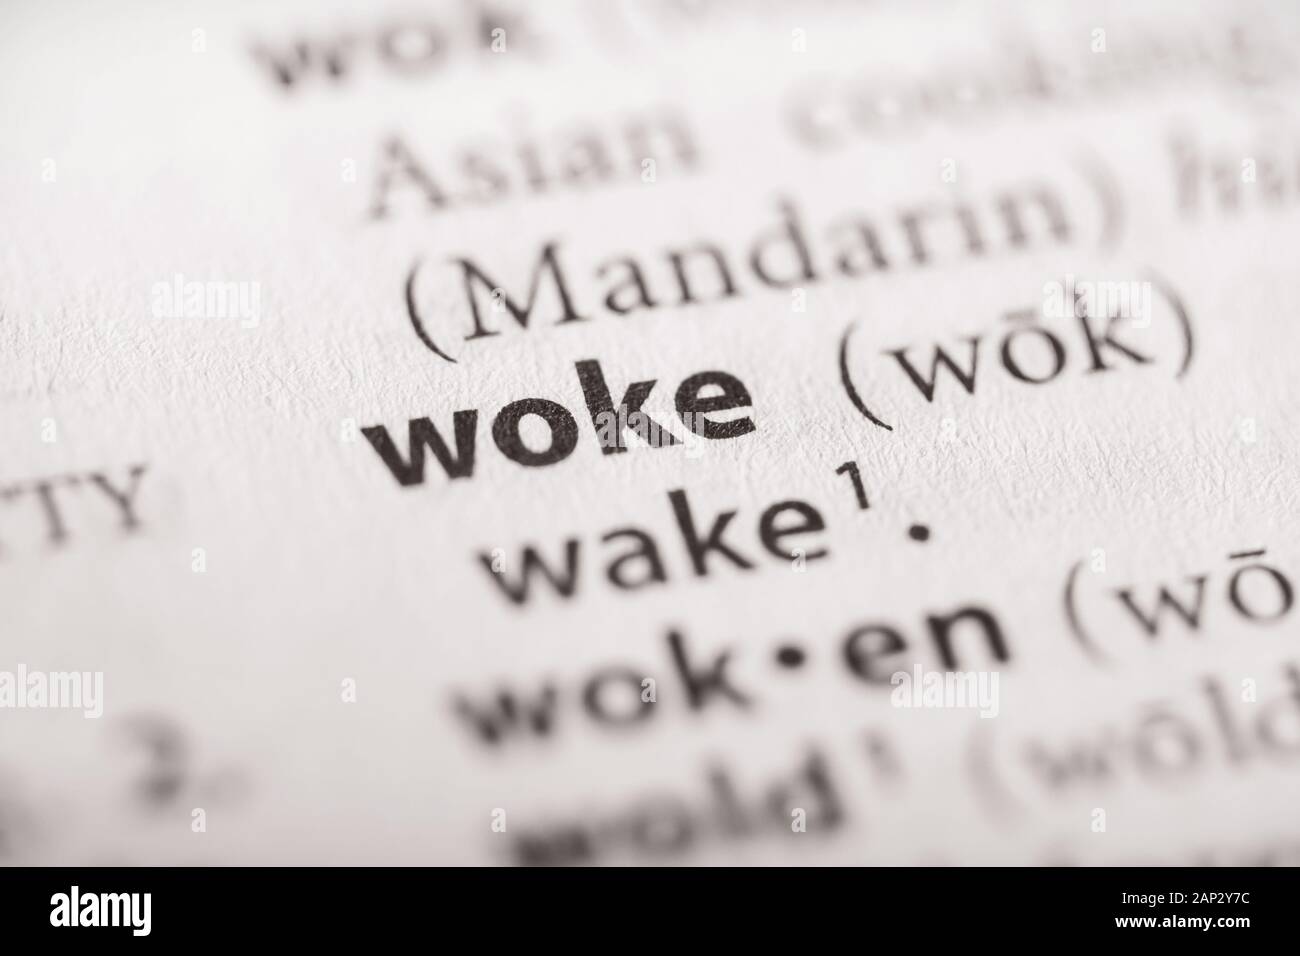 Selective focus on the word woke. Many more word photos in my portfolio. Stock Photo